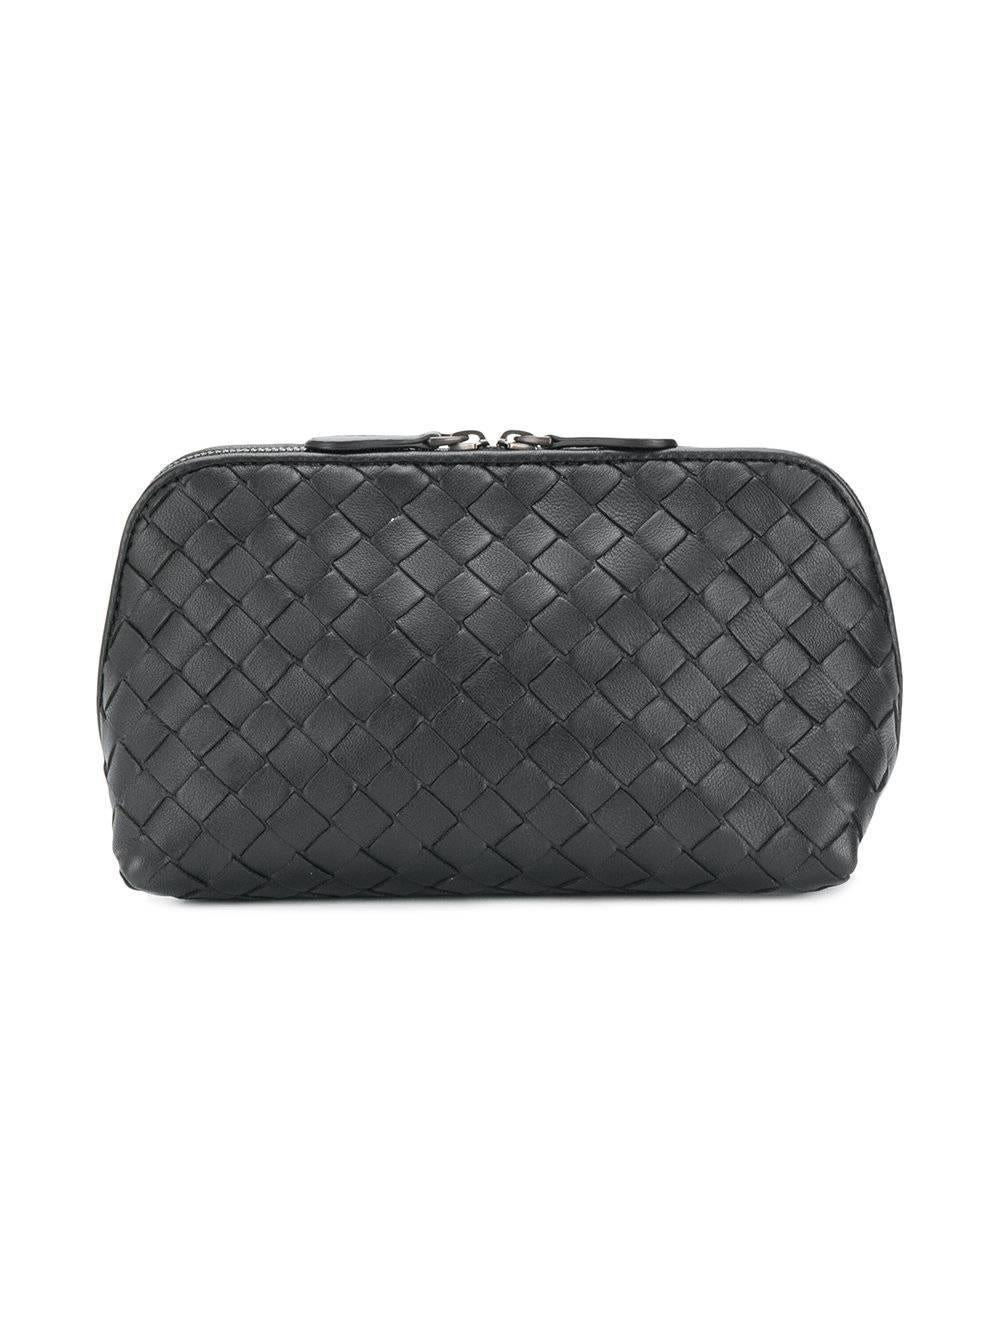 This handily sized black leather intrecciato woven vanity case featuring a top zip fastening and a main internal compartment. Perfect for a top shelf, or organising essentials in one's handbag.

Material: Nappa leather

Colour: Black

Measurements: